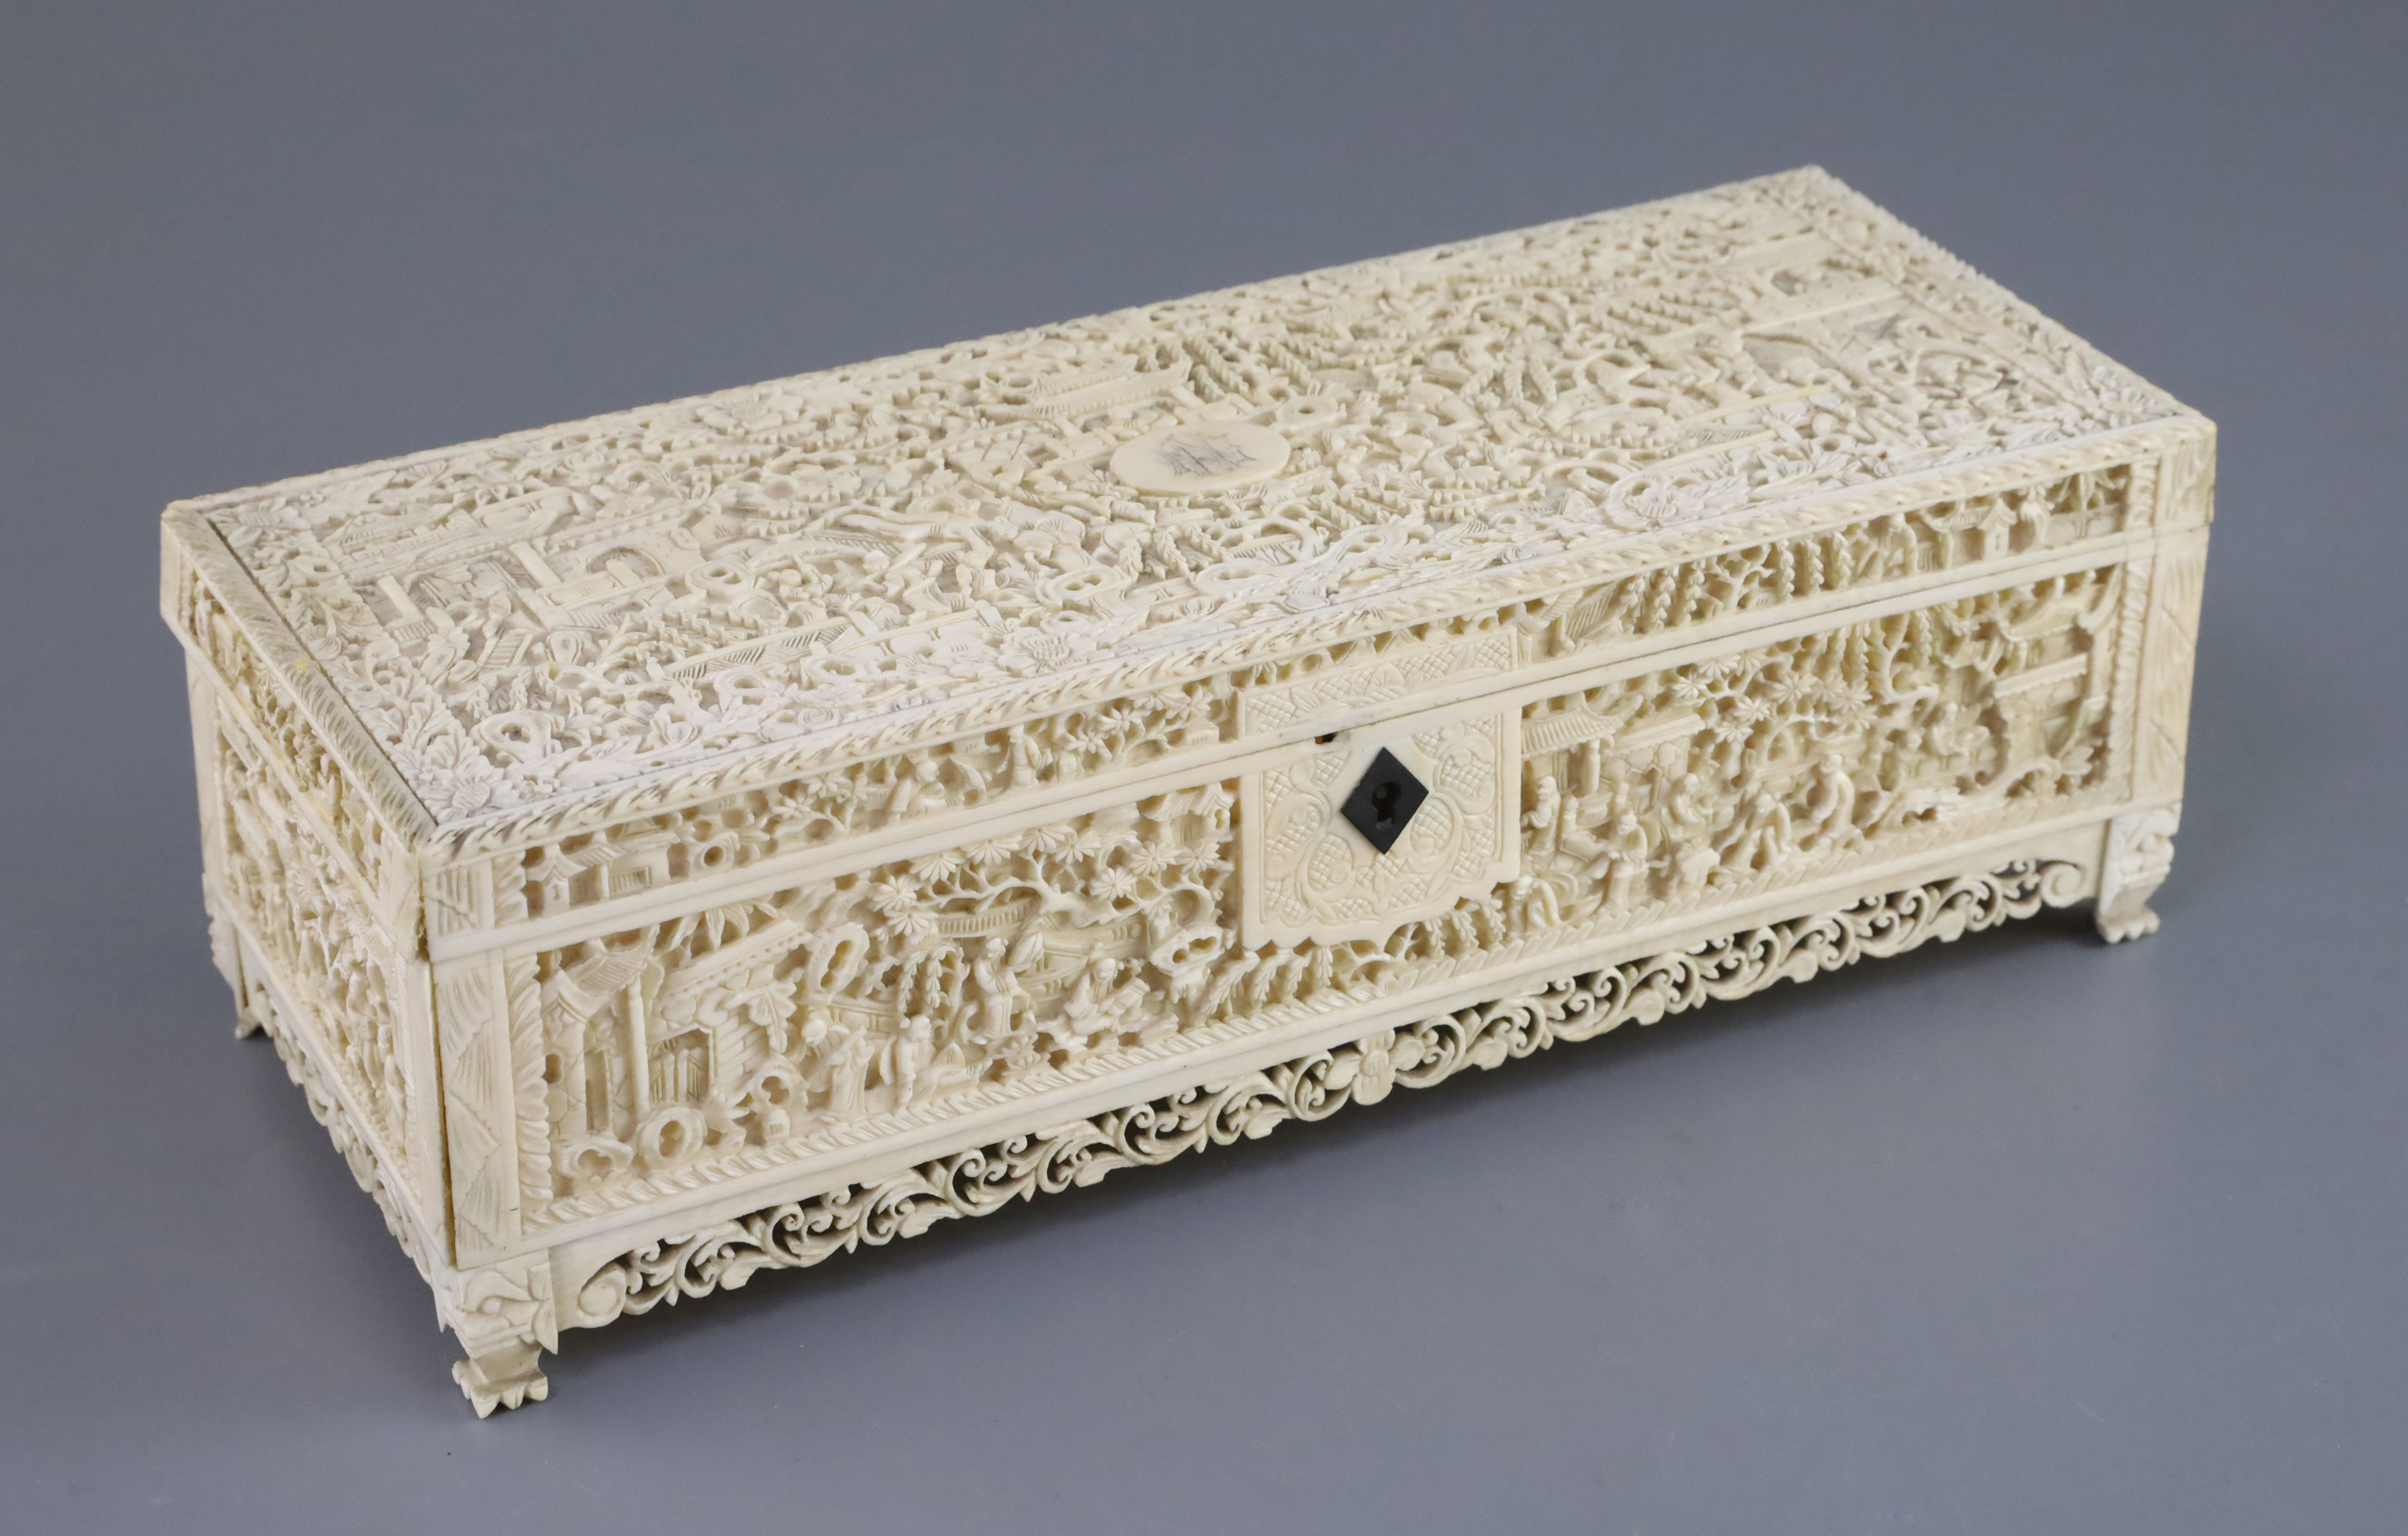 A Chinese export ivory casket, 19th century, carved in high relief with figures amid paviloins and